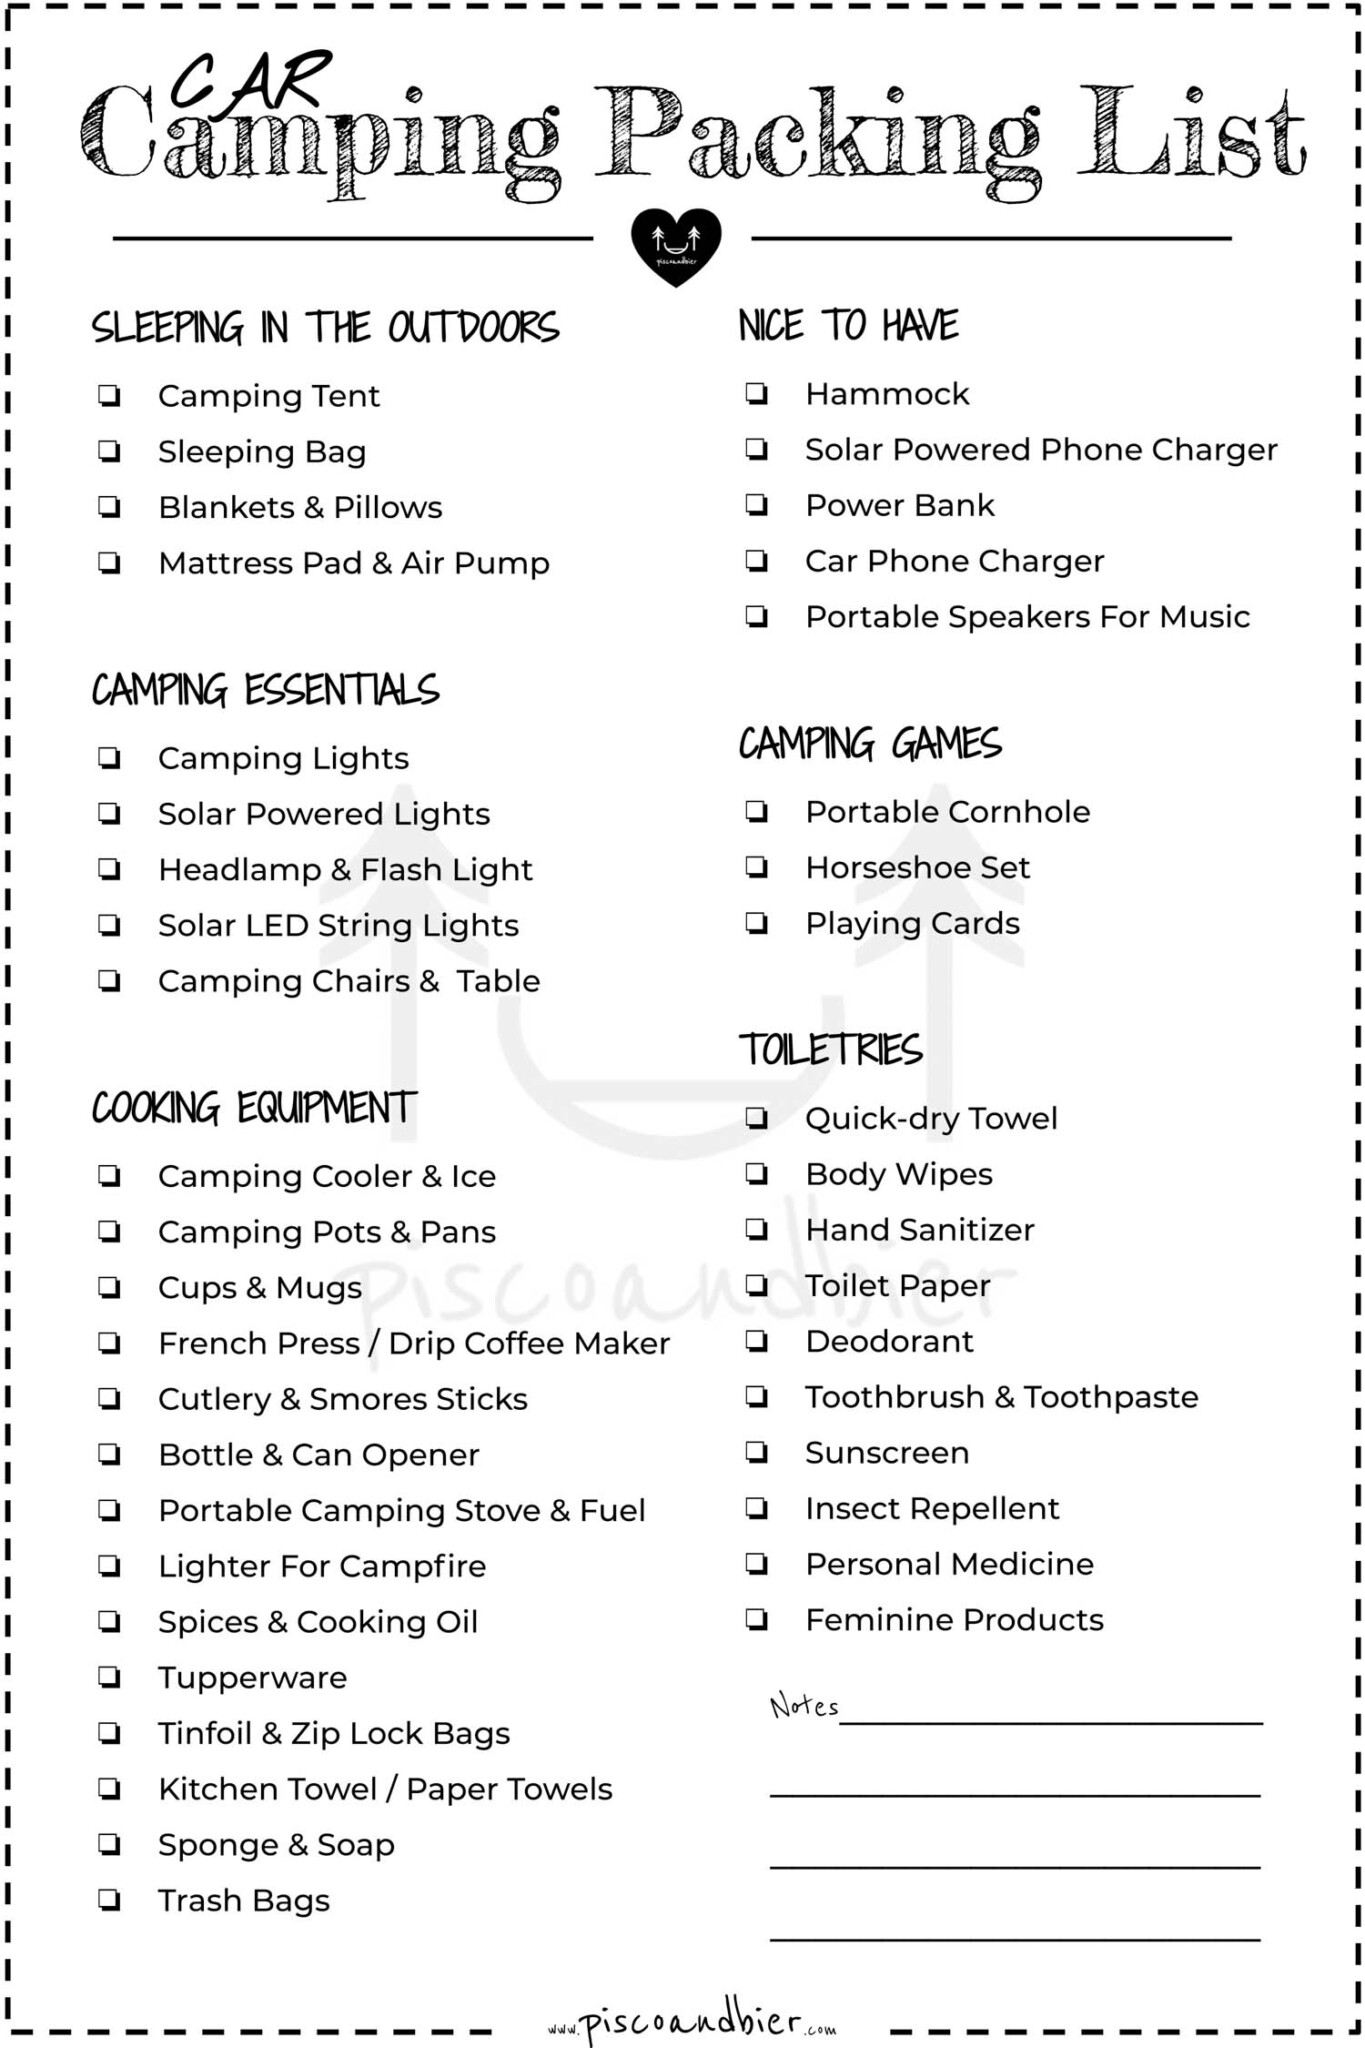 What To Pack For Car Camping - Printable Camping Packing Checklist